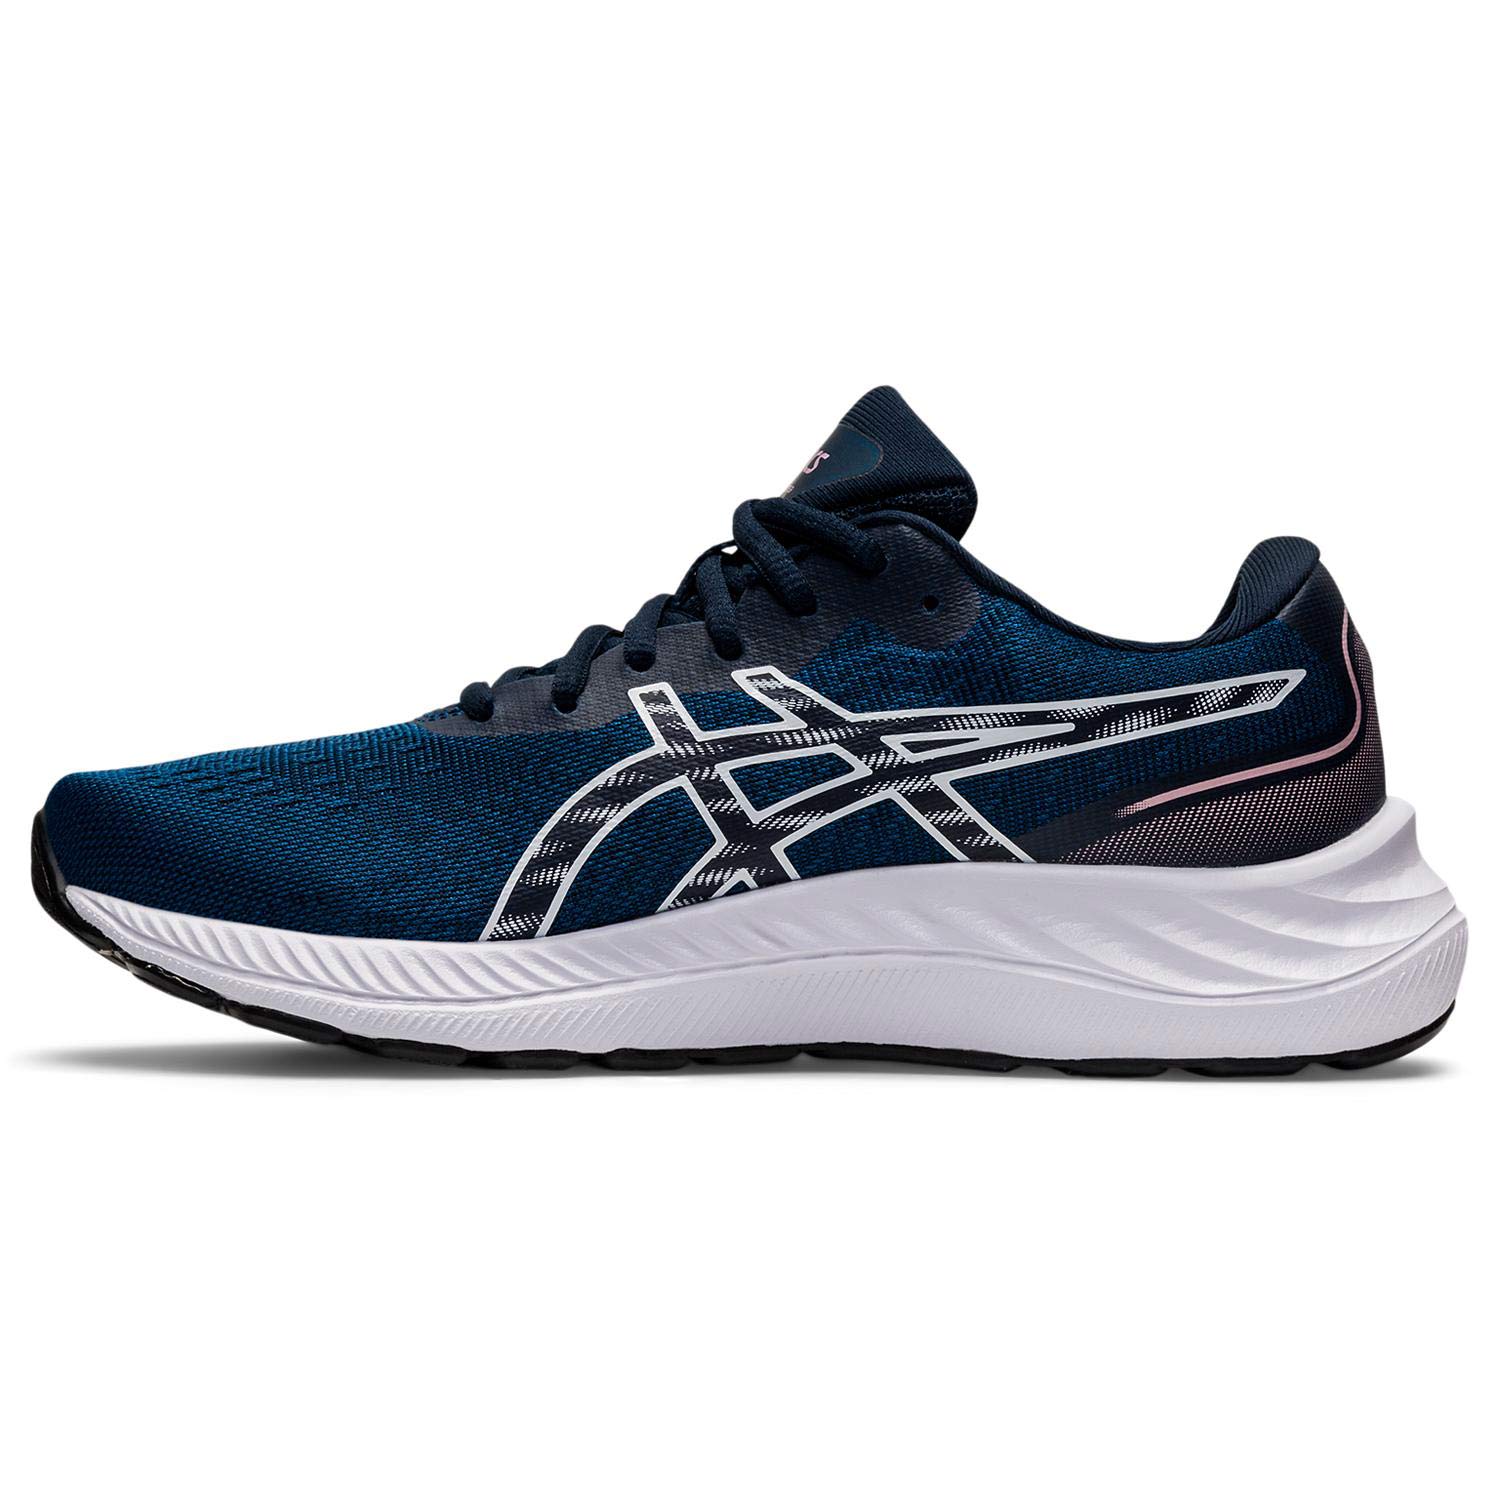 ASICS GEL-EXCITE 9 WOMENS RUNNING SHOES